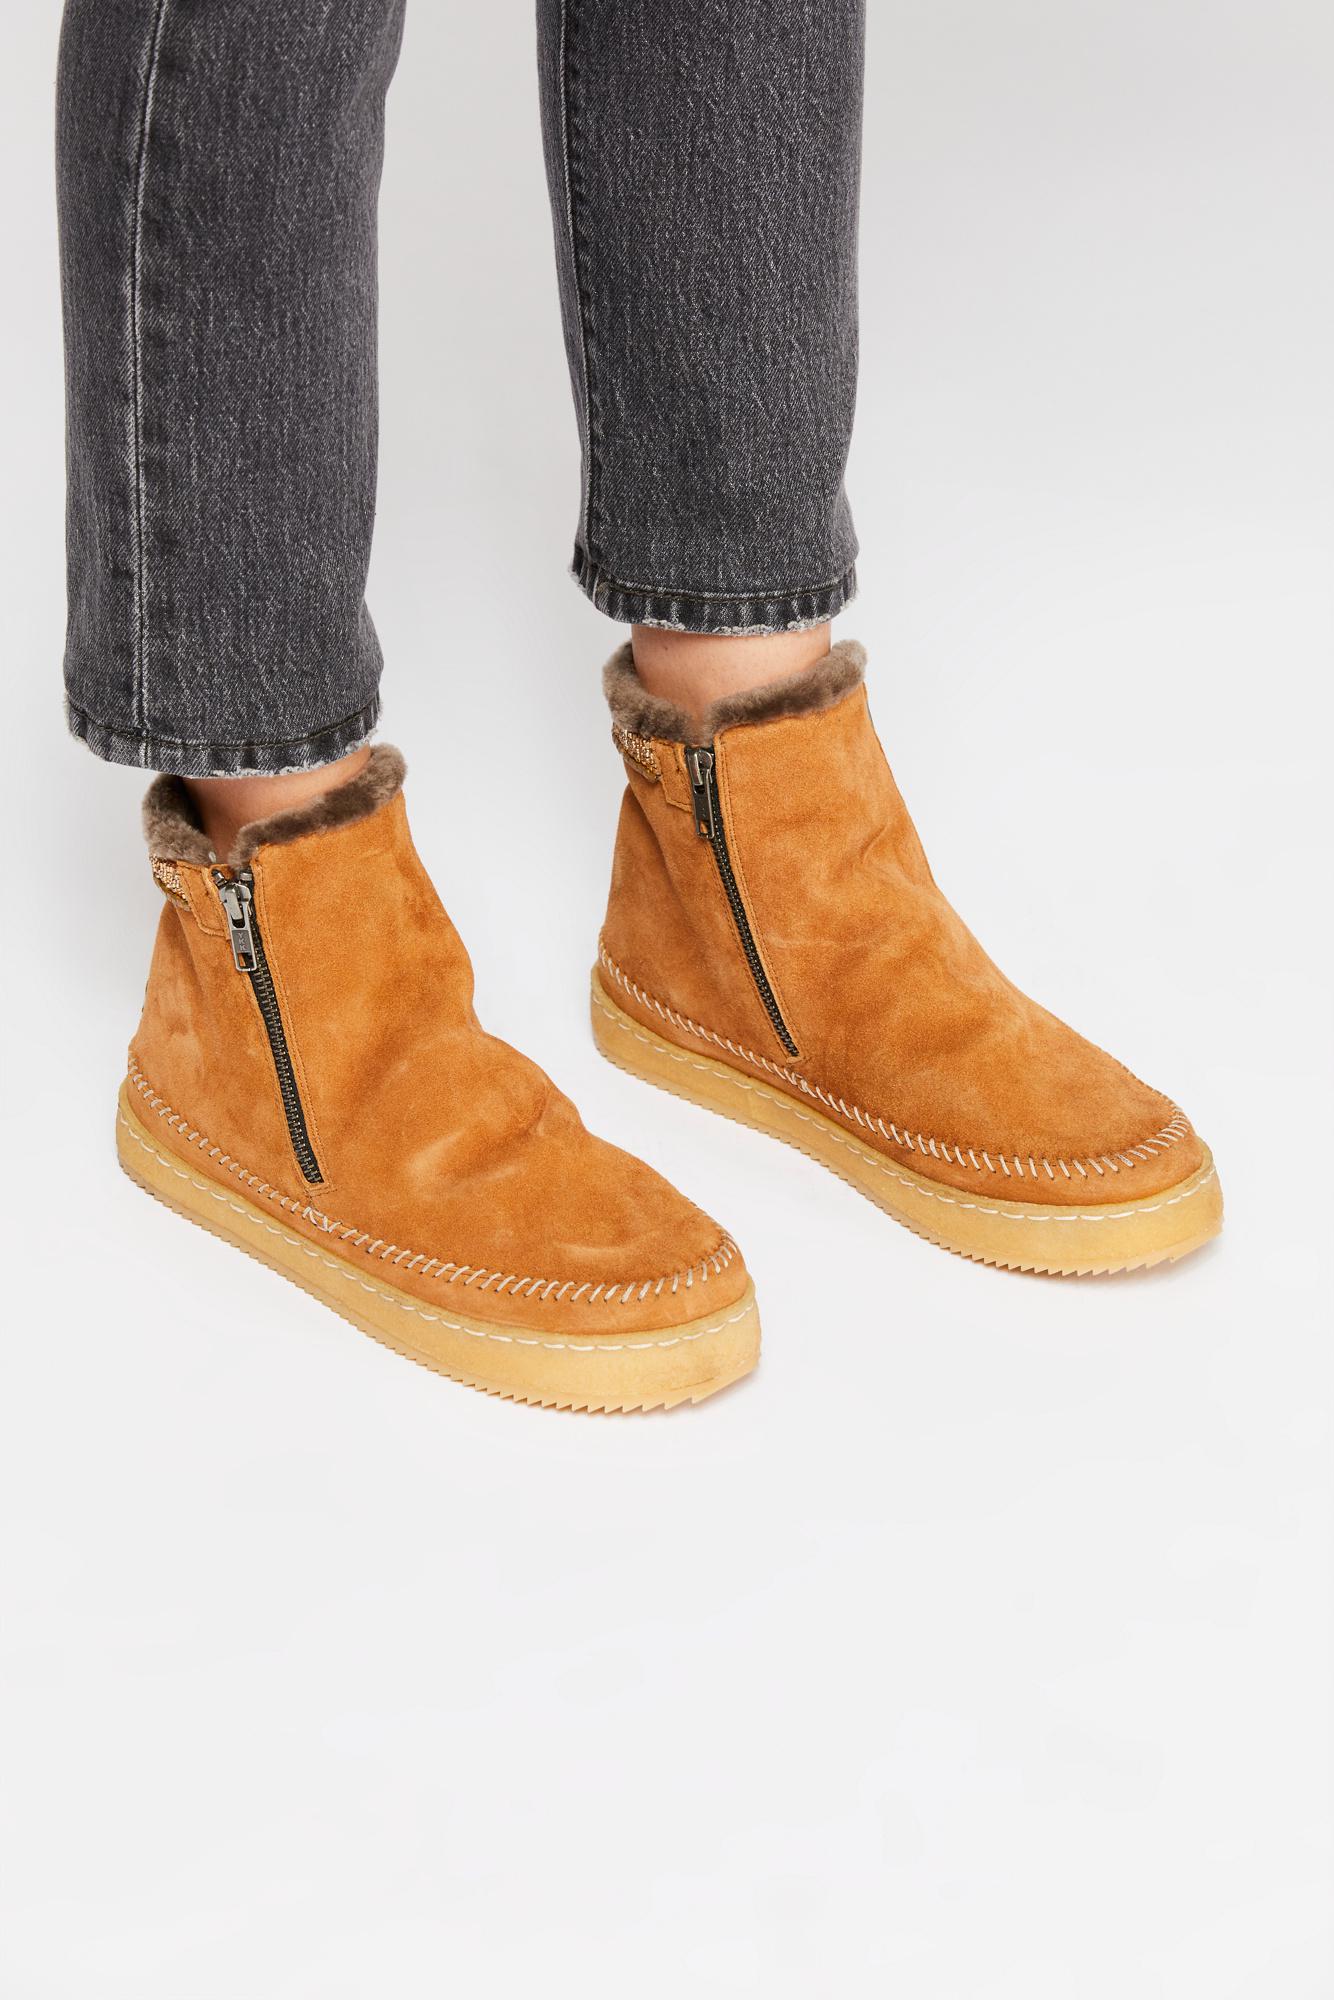 Free People Wool Walkabout Ankle Boot By Laidback London in Tan (Brown) -  Lyst